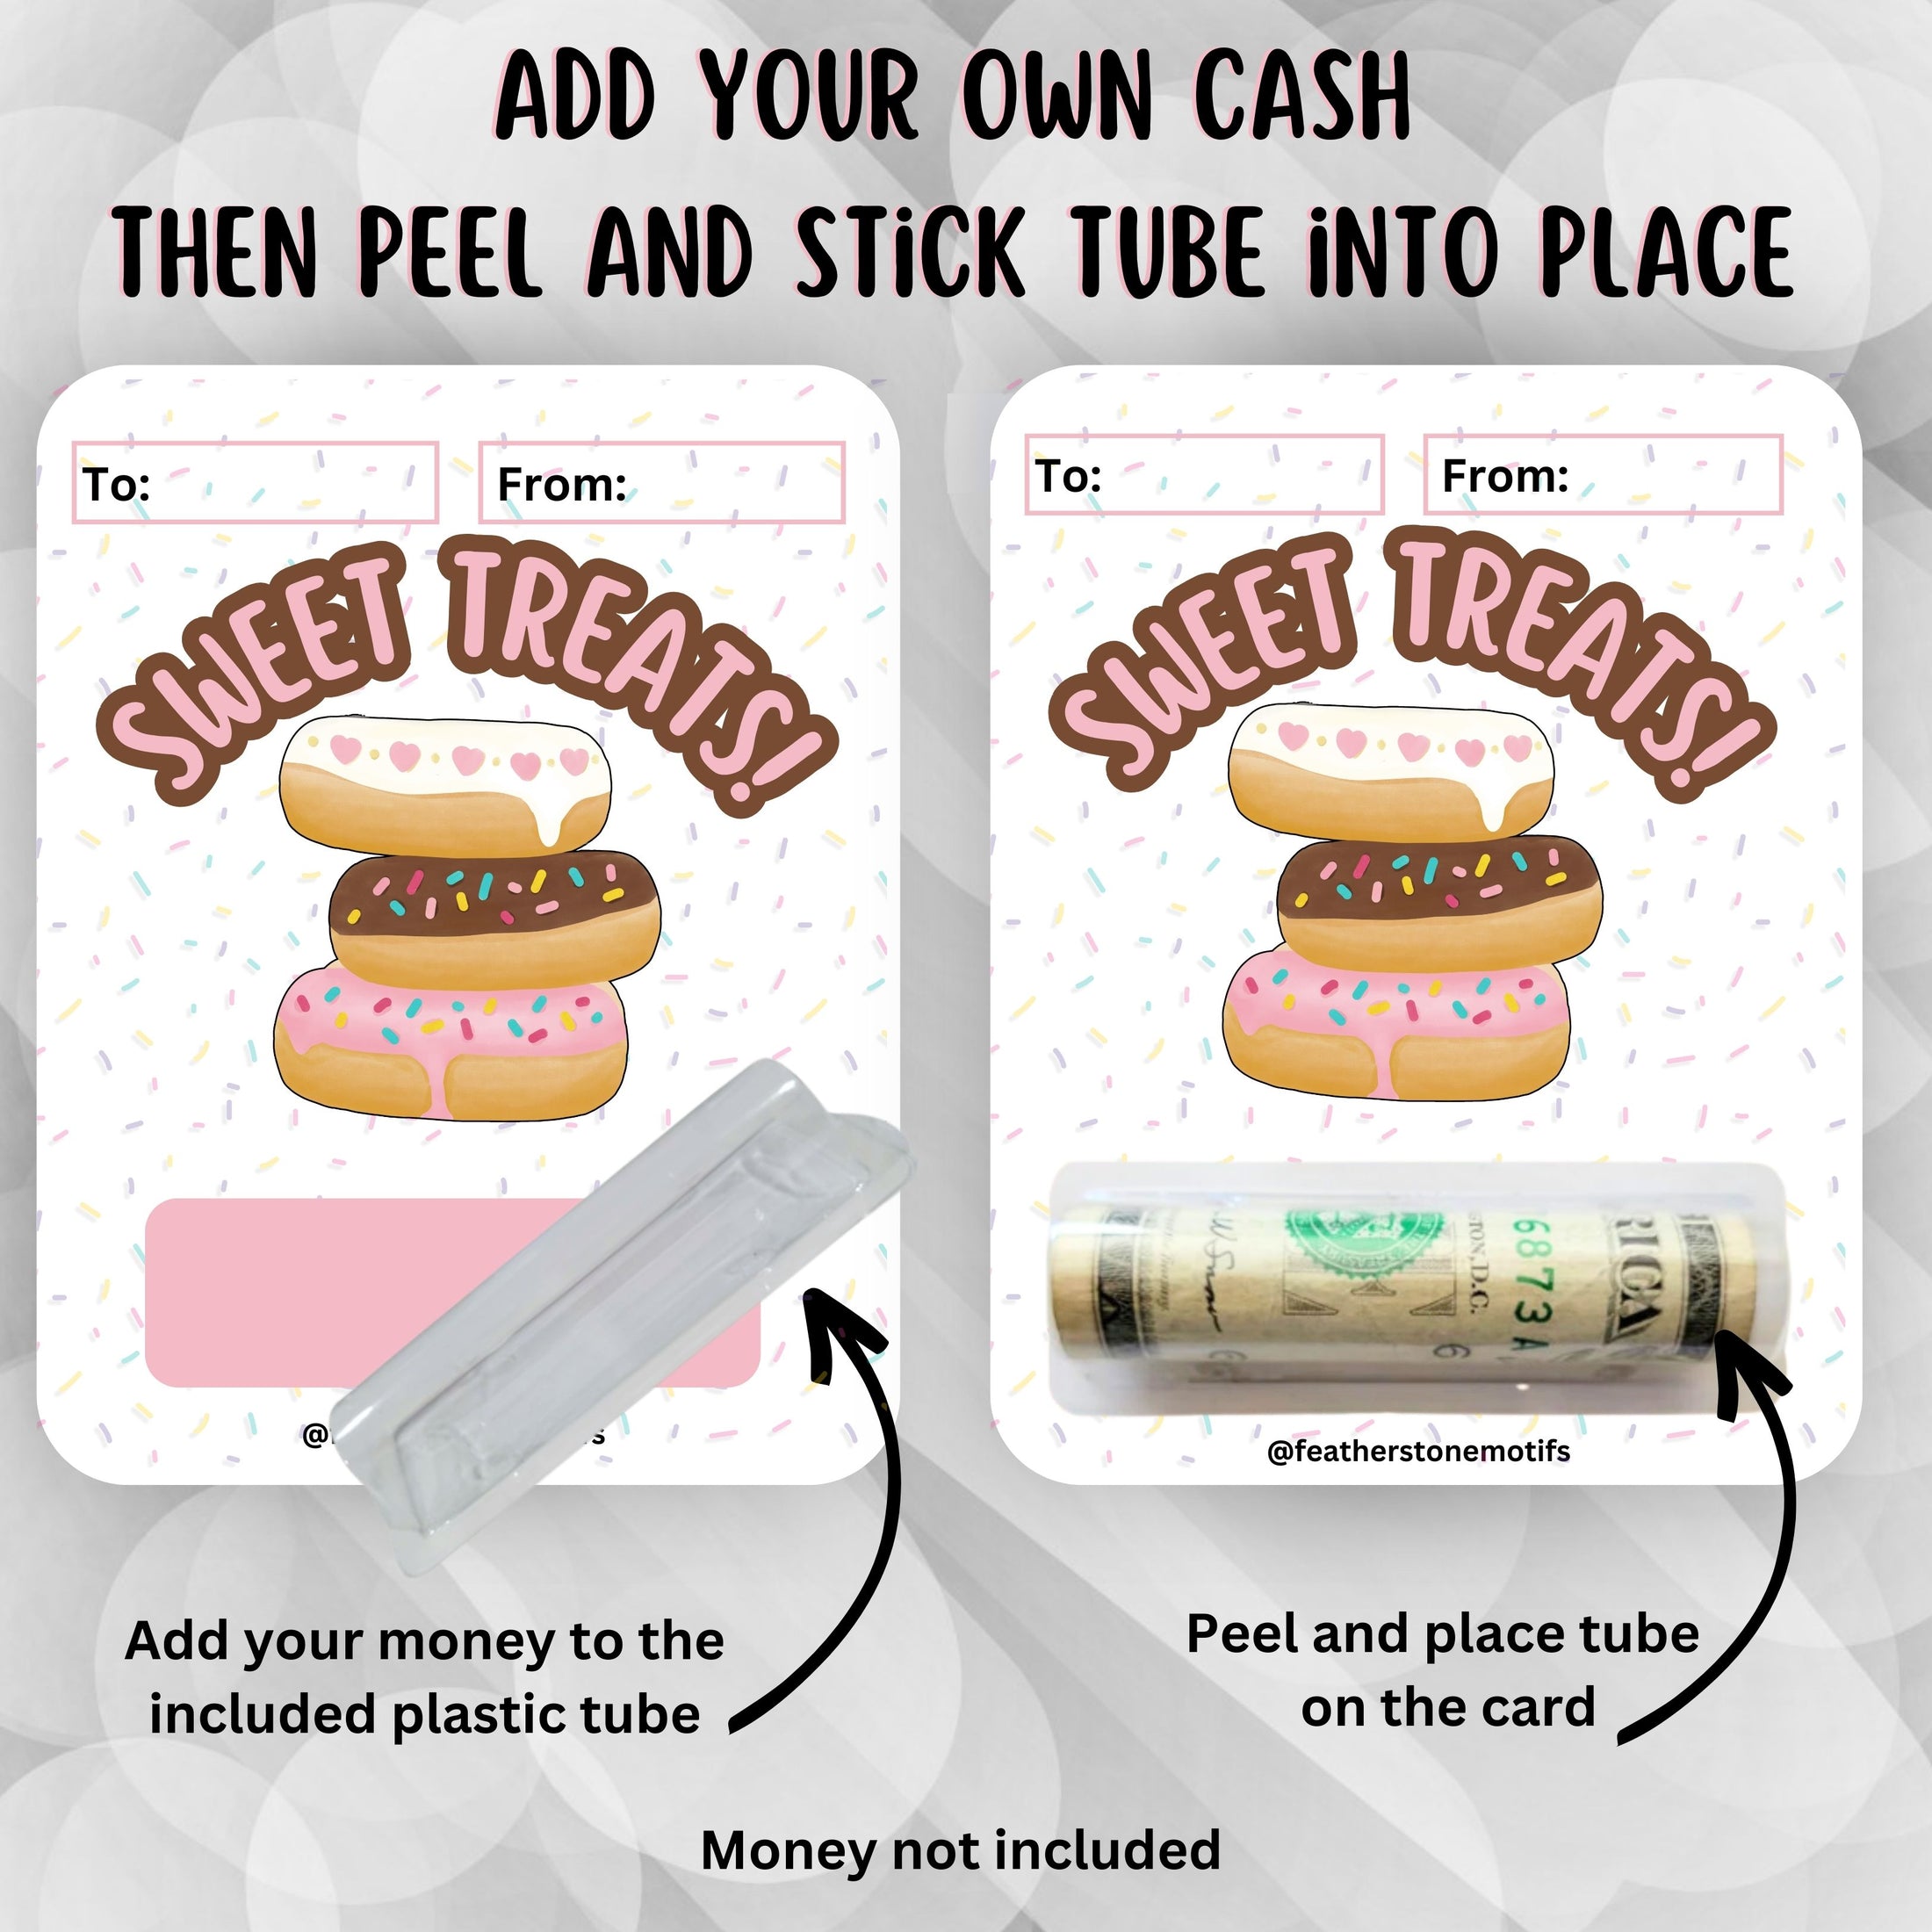 This image shows how to attach the money tube to the Sweet Treats Money Card.